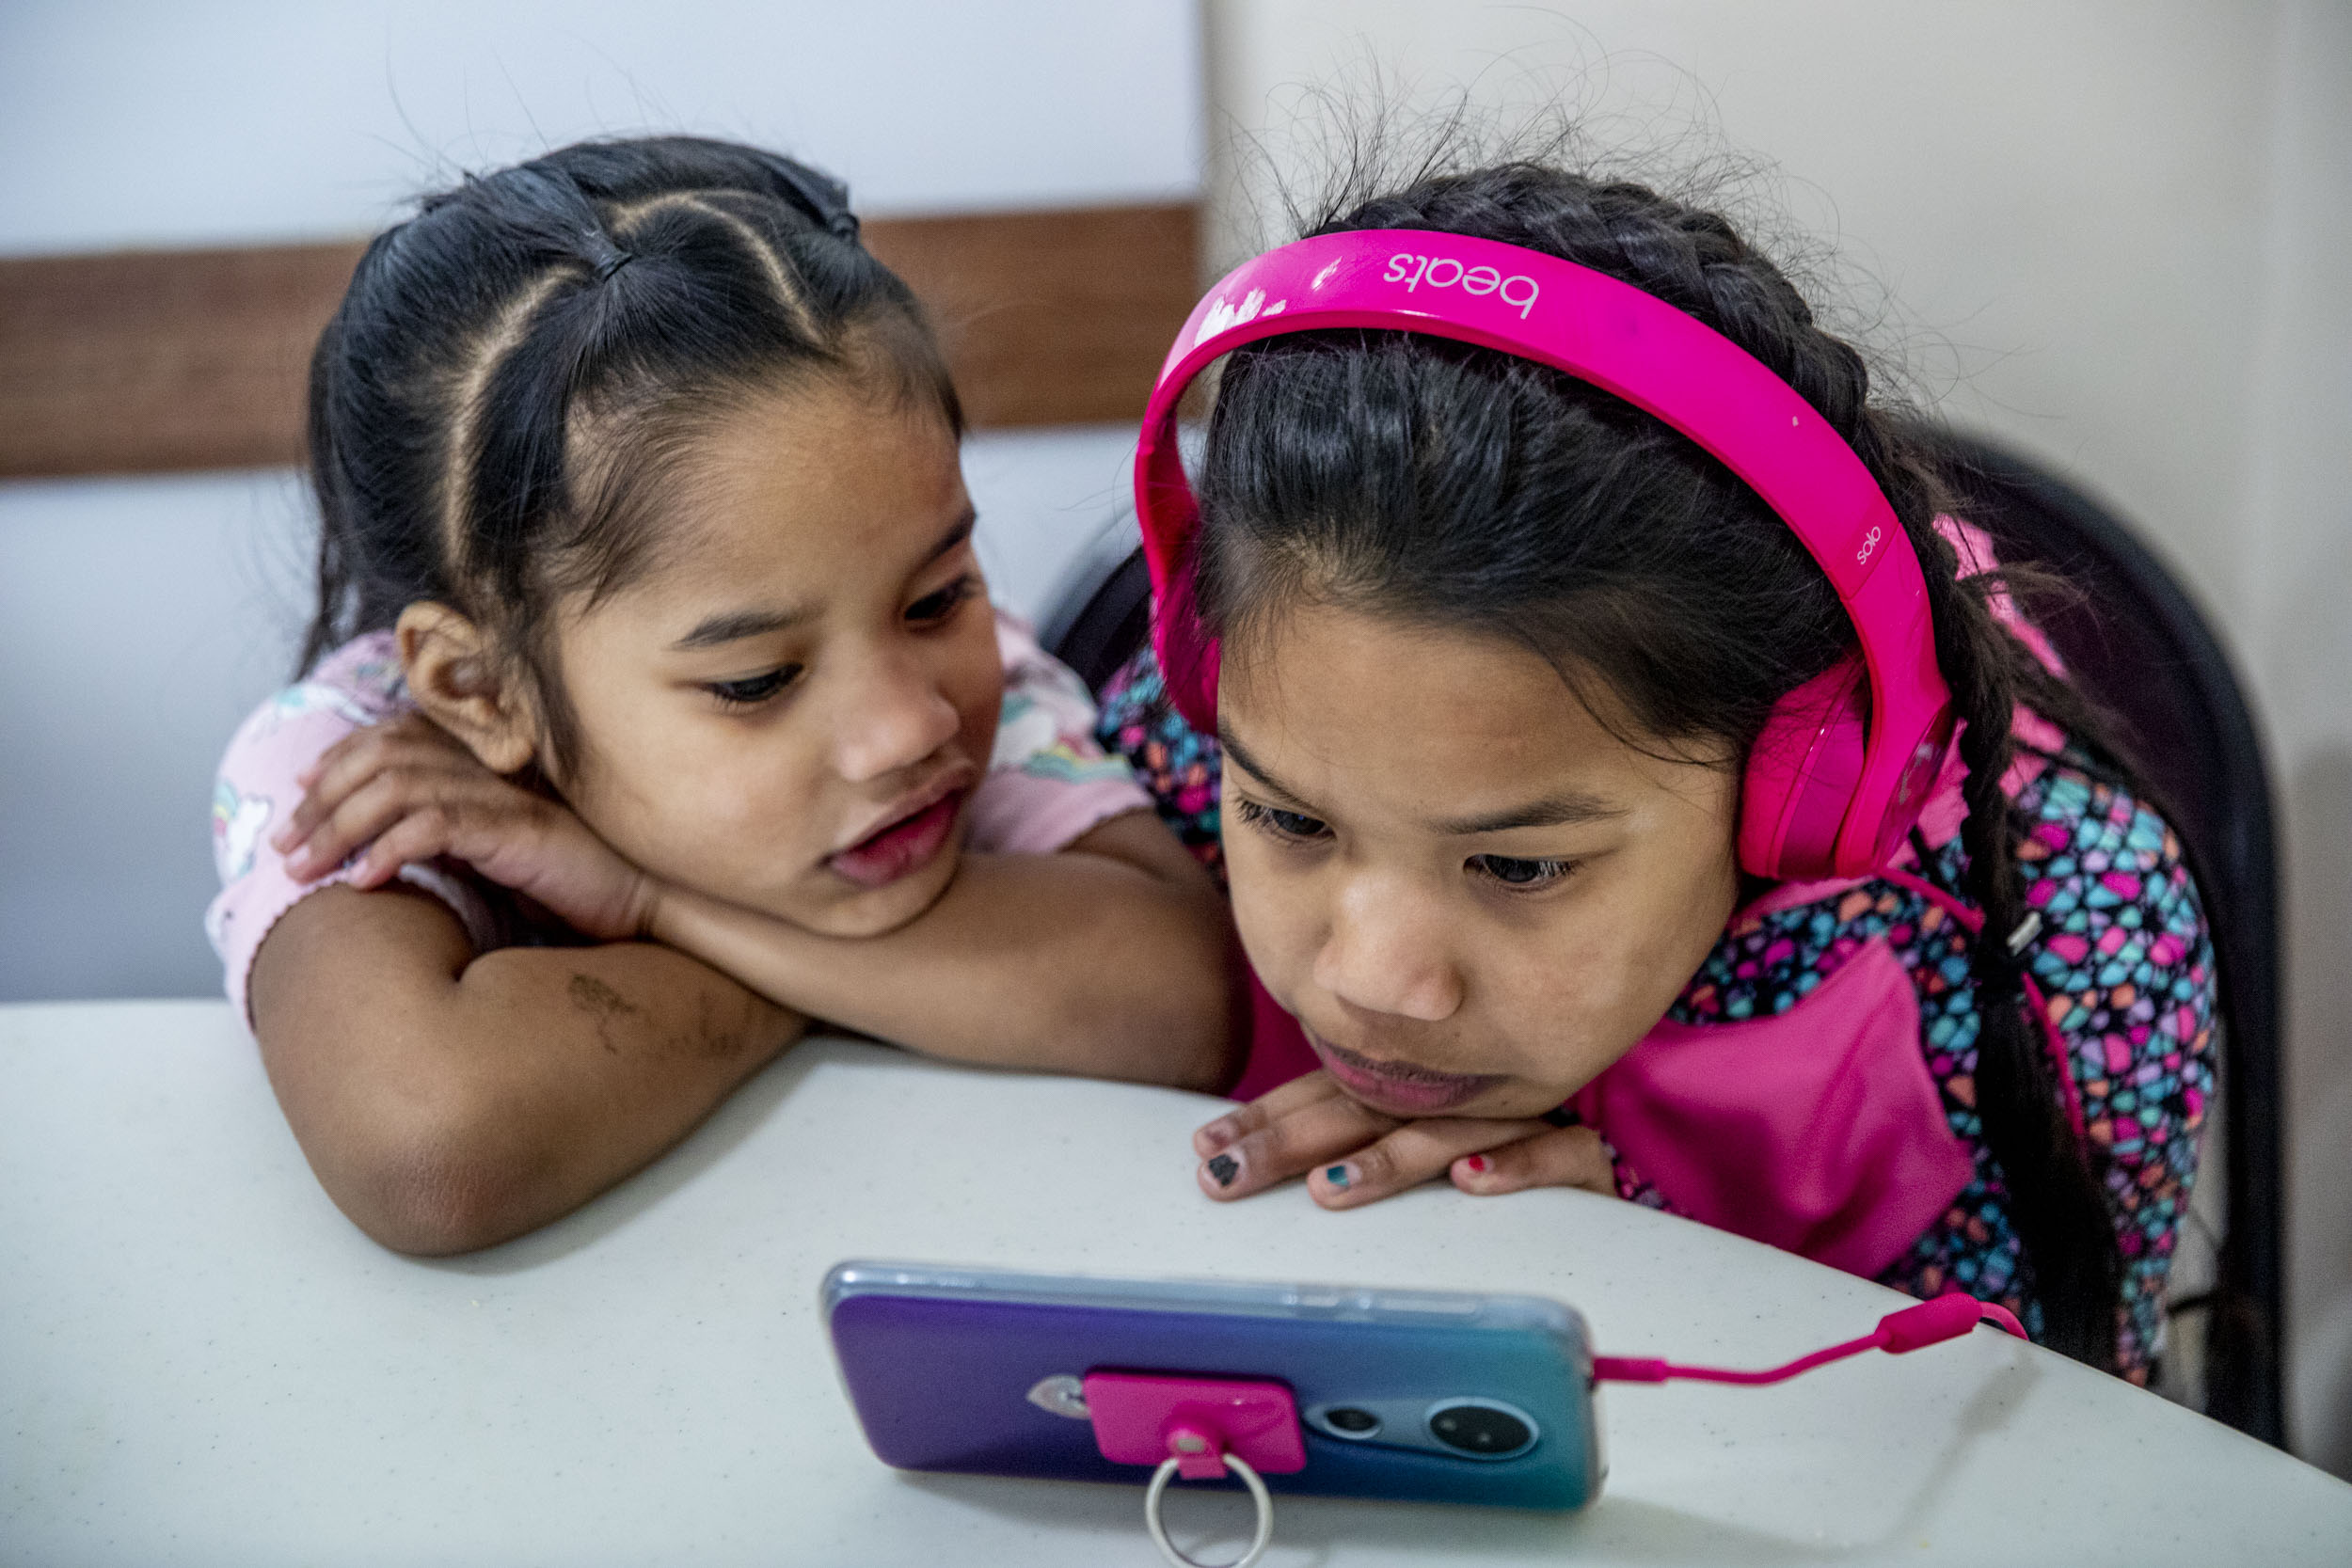 Sisters Faith, 4, left, and Zinnia Lejer, 7, watch cartoons on a phone in the common area at Mary's Place homeless shelter in Burien on March 1, 2019. (Photo by Dorothy Edwards/Crosscut)